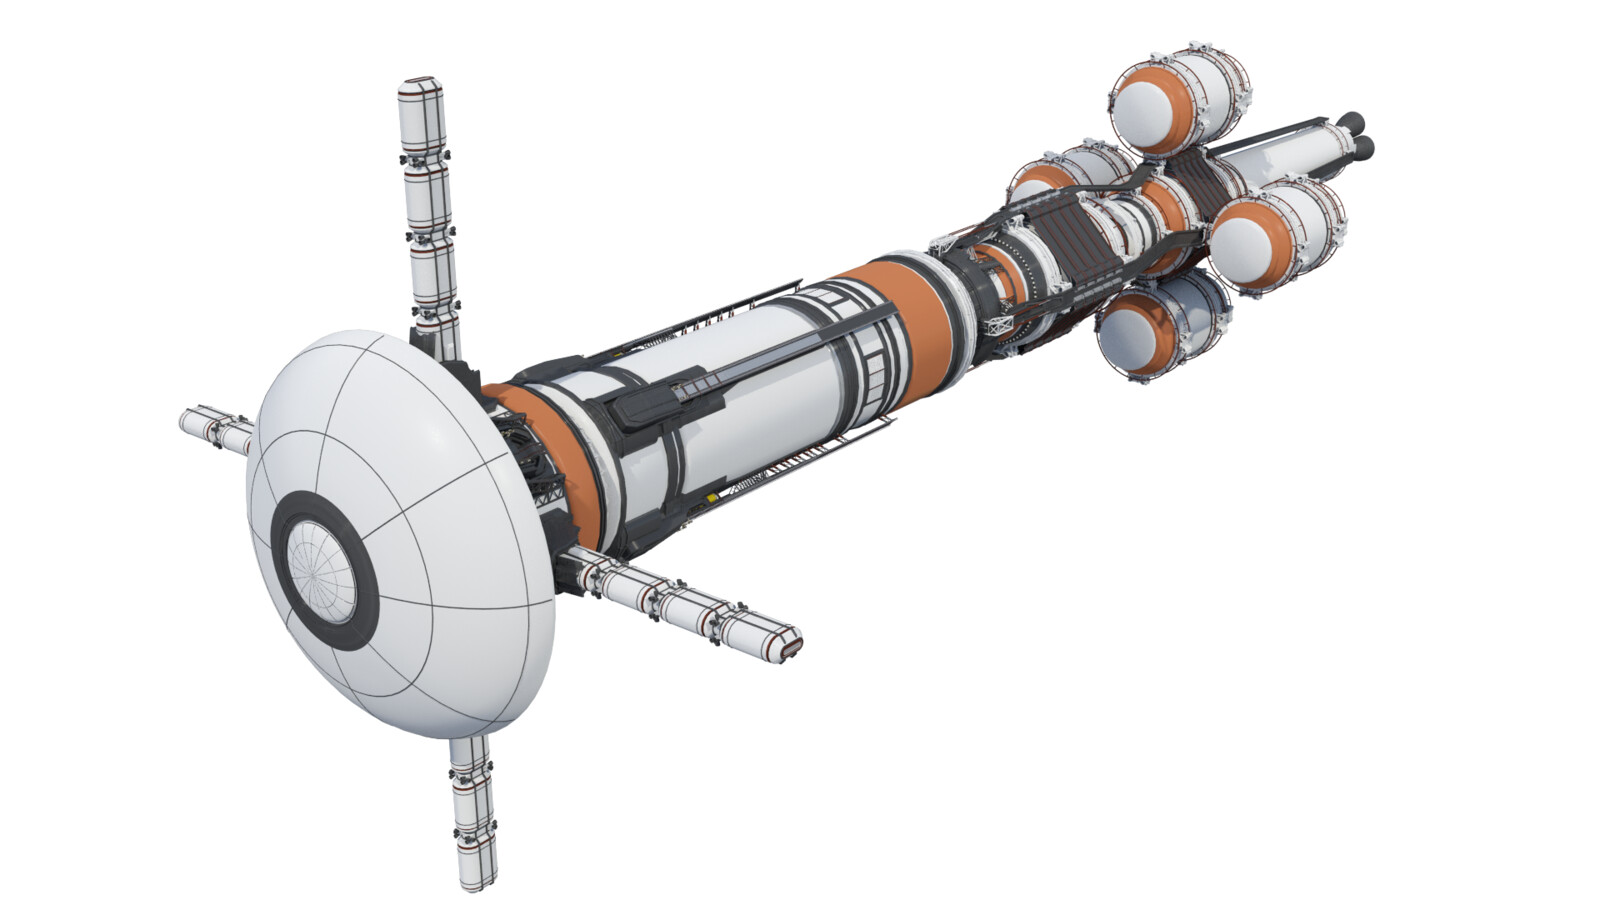 The final design, with light armor and 4 massive propellant tanks to supply a small fleet for months